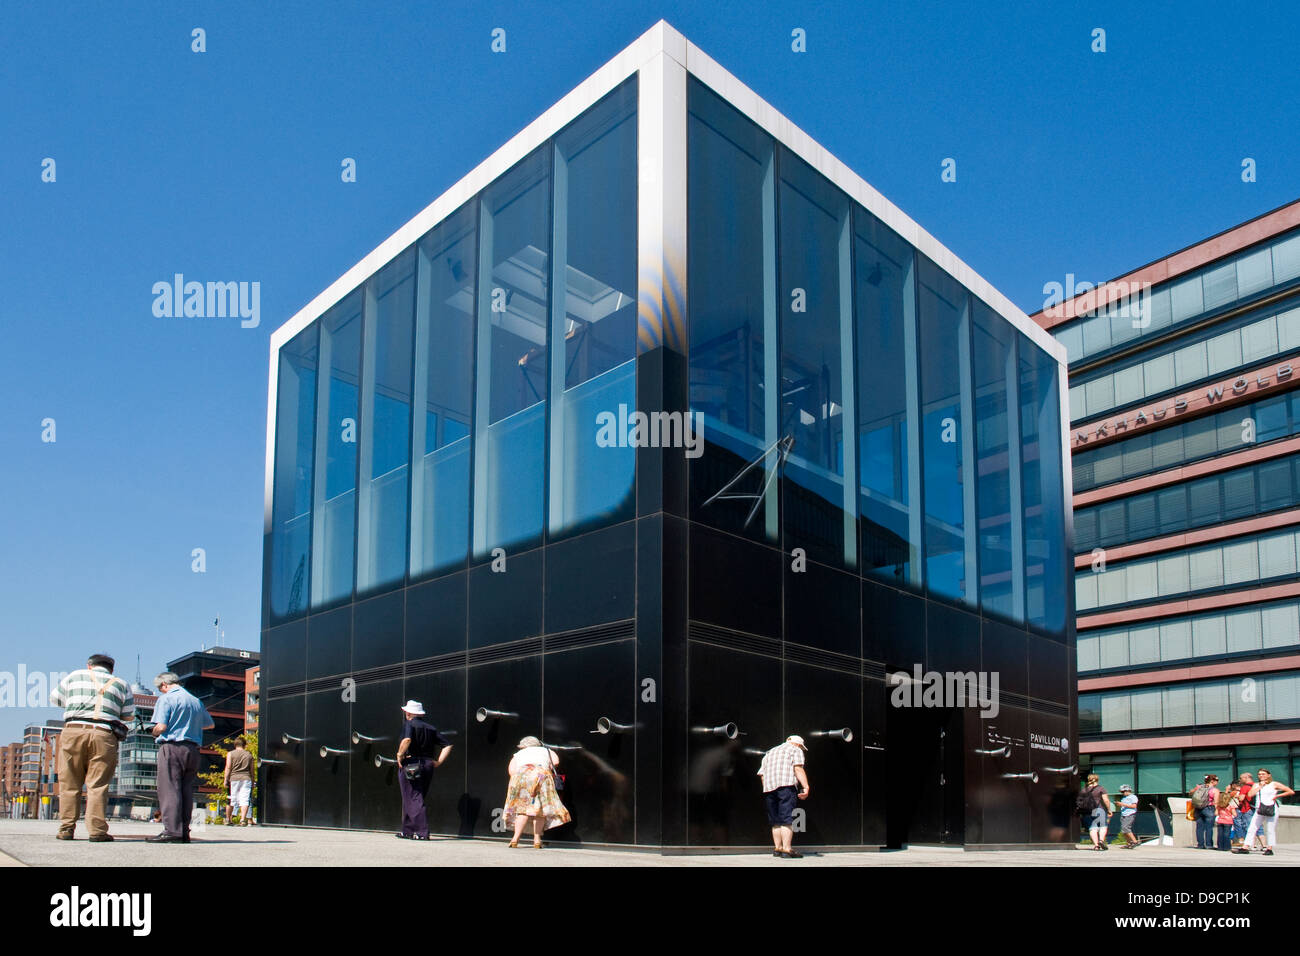 Pavilion of information of the Elbphilharmonie in the harbour city, information Pavilion of the Elbe Philharmonic sound in the h Stock Photo